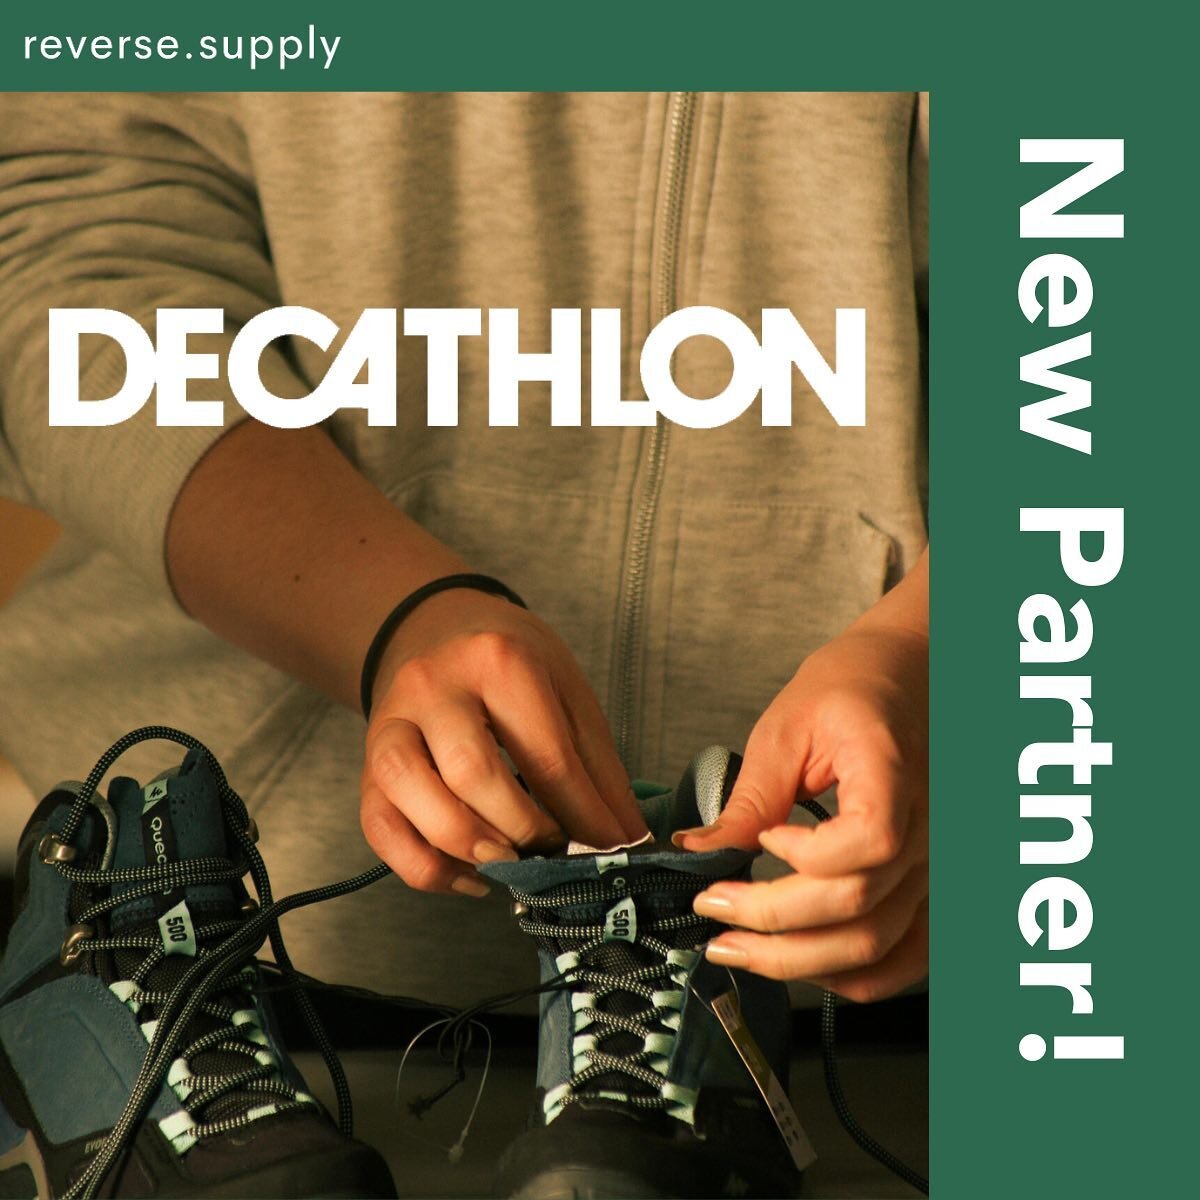 Breaking News! 💥
We are excited to introduce our newest recommerce partner @decathlondeutschland 🎉
While Decathlon&lsquo;s buyback program for equipment went live in 2022, we extended its secondhand offer by apparel &amp; footwear. Browse the selec